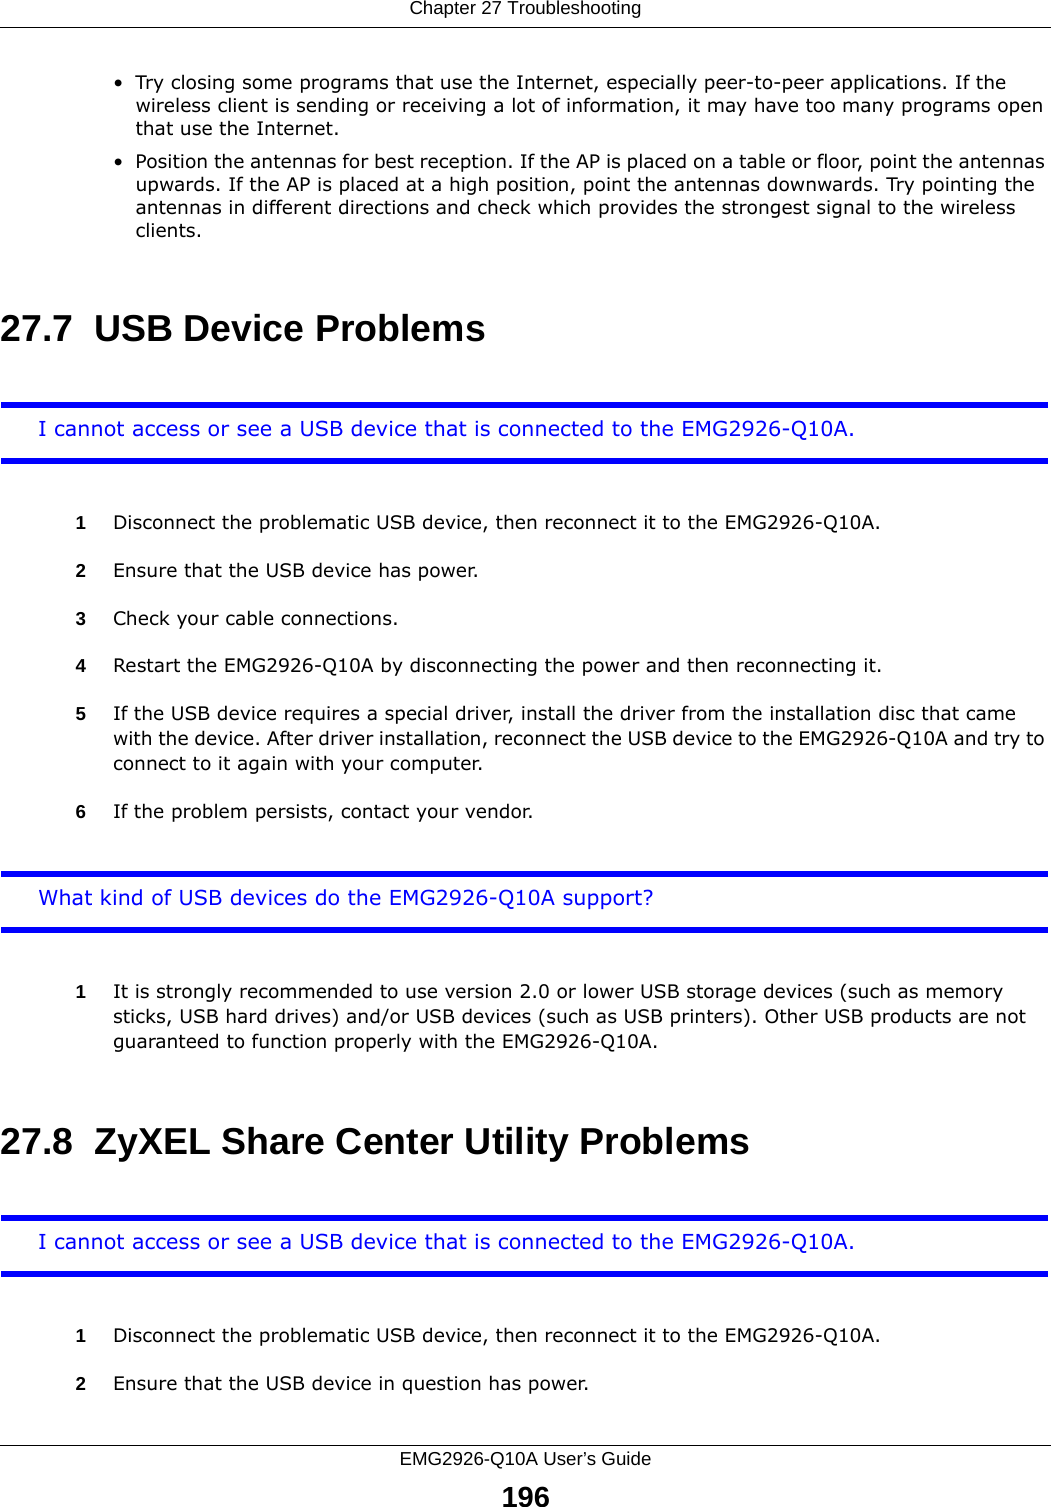 Chapter 27 TroubleshootingEMG2926-Q10A User’s Guide196• Try closing some programs that use the Internet, especially peer-to-peer applications. If the wireless client is sending or receiving a lot of information, it may have too many programs open that use the Internet. • Position the antennas for best reception. If the AP is placed on a table or floor, point the antennas upwards. If the AP is placed at a high position, point the antennas downwards. Try pointing the antennas in different directions and check which provides the strongest signal to the wireless clients. 27.7  USB Device ProblemsI cannot access or see a USB device that is connected to the EMG2926-Q10A.1Disconnect the problematic USB device, then reconnect it to the EMG2926-Q10A.2Ensure that the USB device has power.3Check your cable connections.4Restart the EMG2926-Q10A by disconnecting the power and then reconnecting it.5If the USB device requires a special driver, install the driver from the installation disc that came with the device. After driver installation, reconnect the USB device to the EMG2926-Q10A and try to connect to it again with your computer.6If the problem persists, contact your vendor.What kind of USB devices do the EMG2926-Q10A support?1It is strongly recommended to use version 2.0 or lower USB storage devices (such as memory sticks, USB hard drives) and/or USB devices (such as USB printers). Other USB products are not guaranteed to function properly with the EMG2926-Q10A.27.8  ZyXEL Share Center Utility ProblemsI cannot access or see a USB device that is connected to the EMG2926-Q10A.1Disconnect the problematic USB device, then reconnect it to the EMG2926-Q10A.2Ensure that the USB device in question has power.